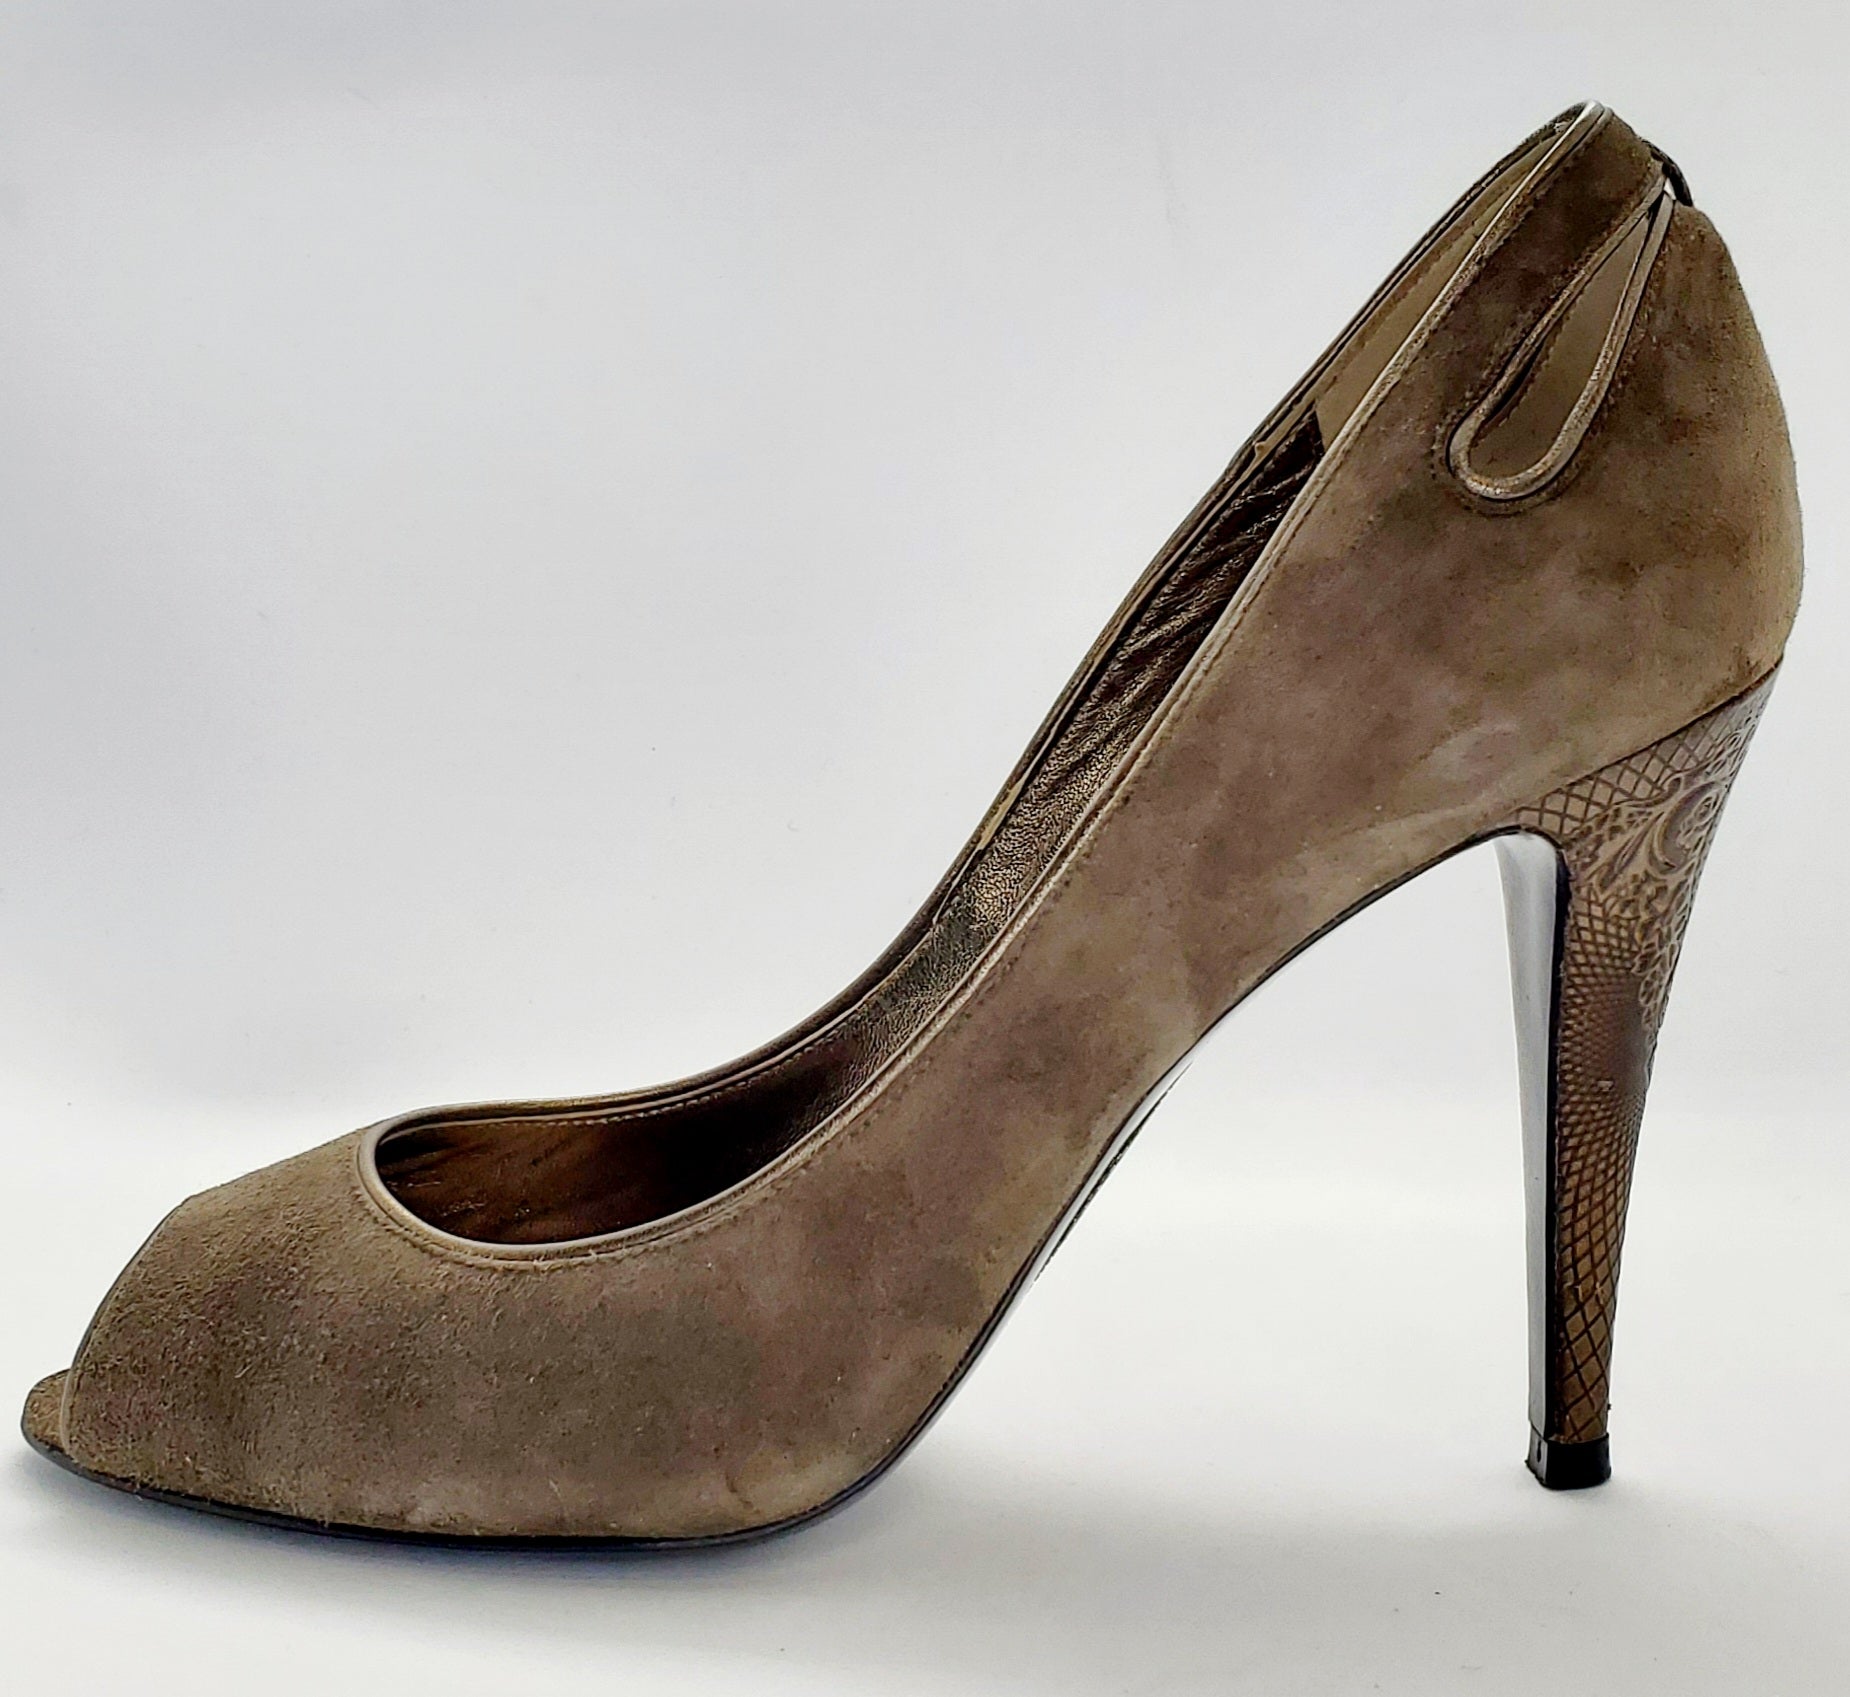 Side view of Elie Tahari Suede open toe pump with ornate patterned keyhole heels